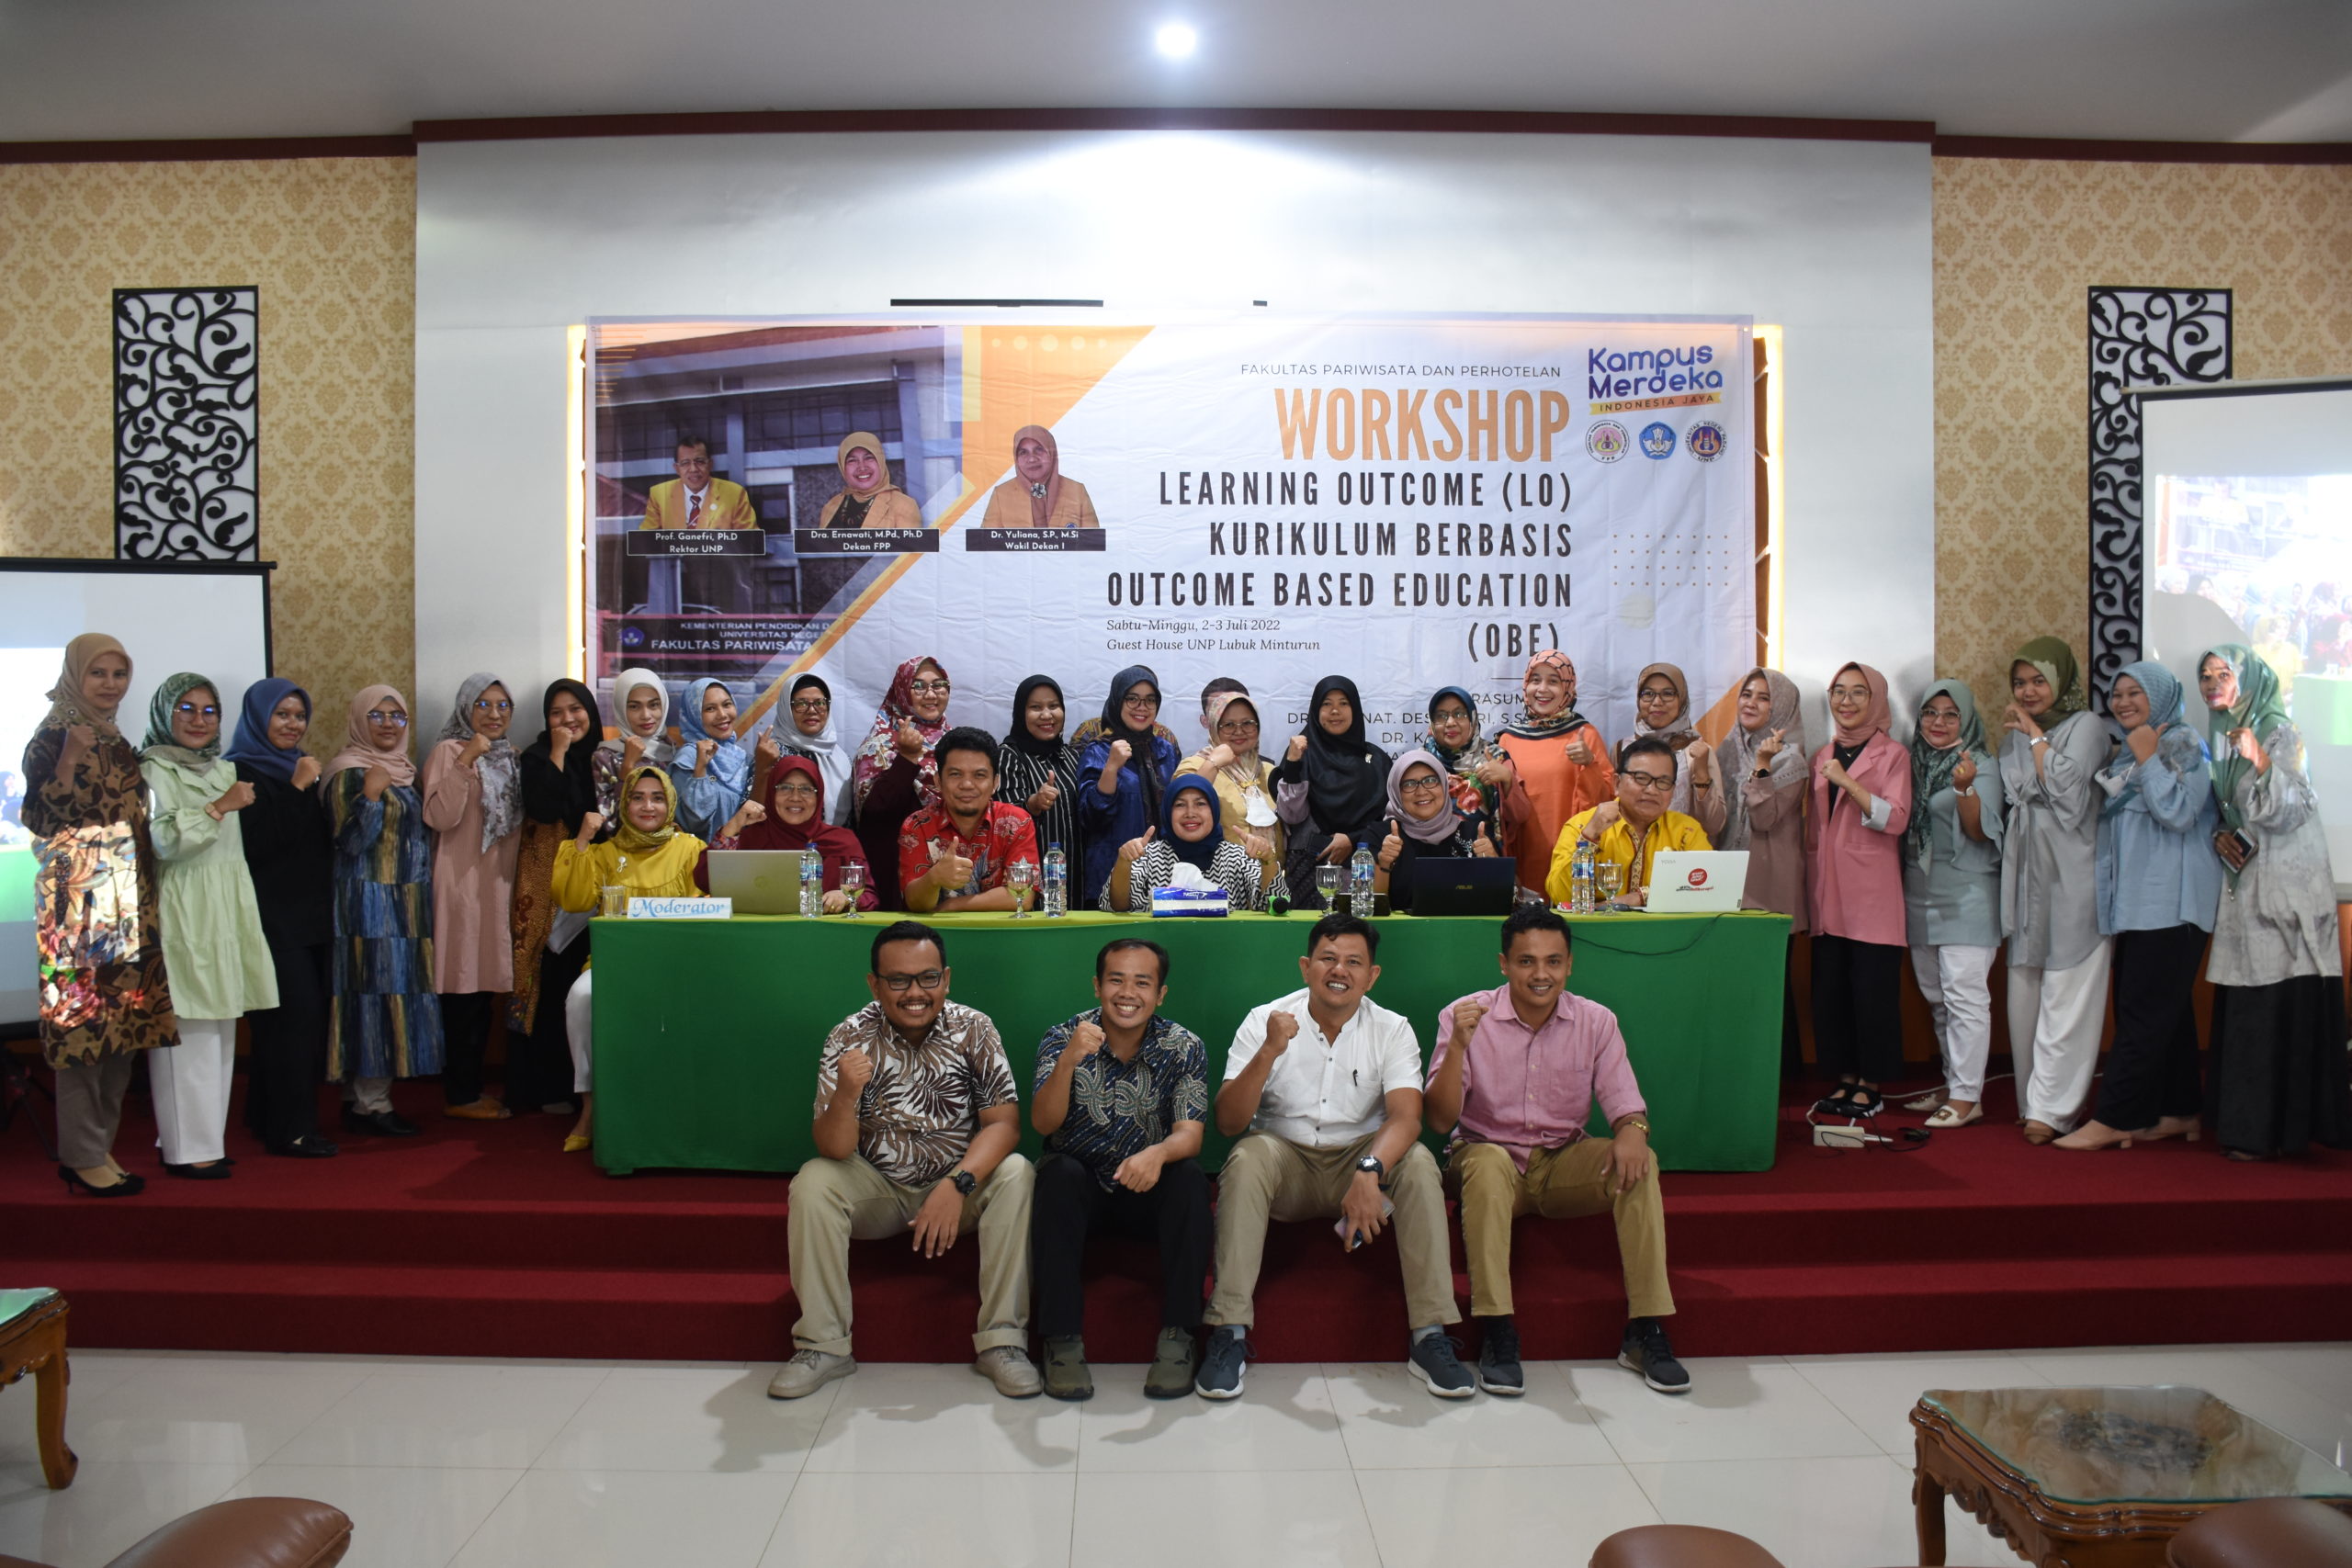 You are currently viewing Workshop Learning Outcome (LO) Kurikulum Berbasis Outcome Based Education (OBE)